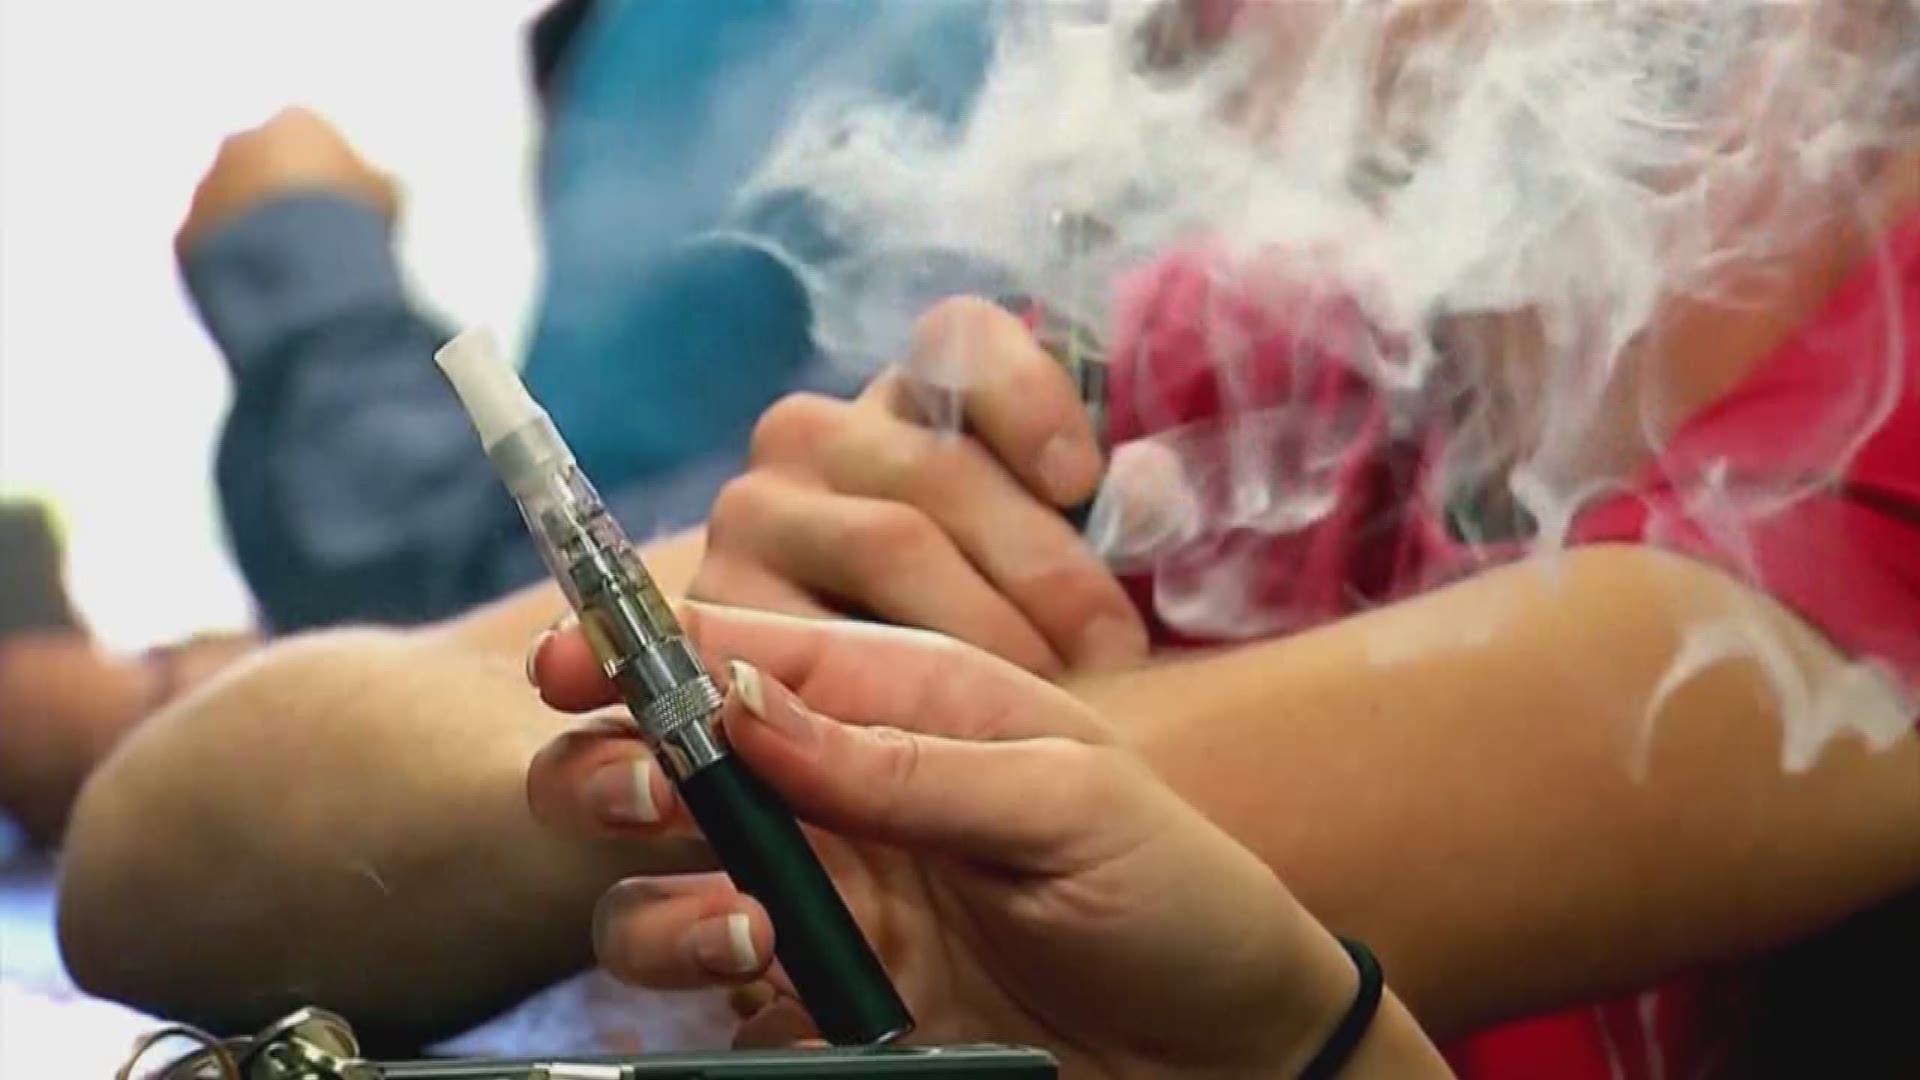 Local health organizations are working with schools to curb the growing problem.